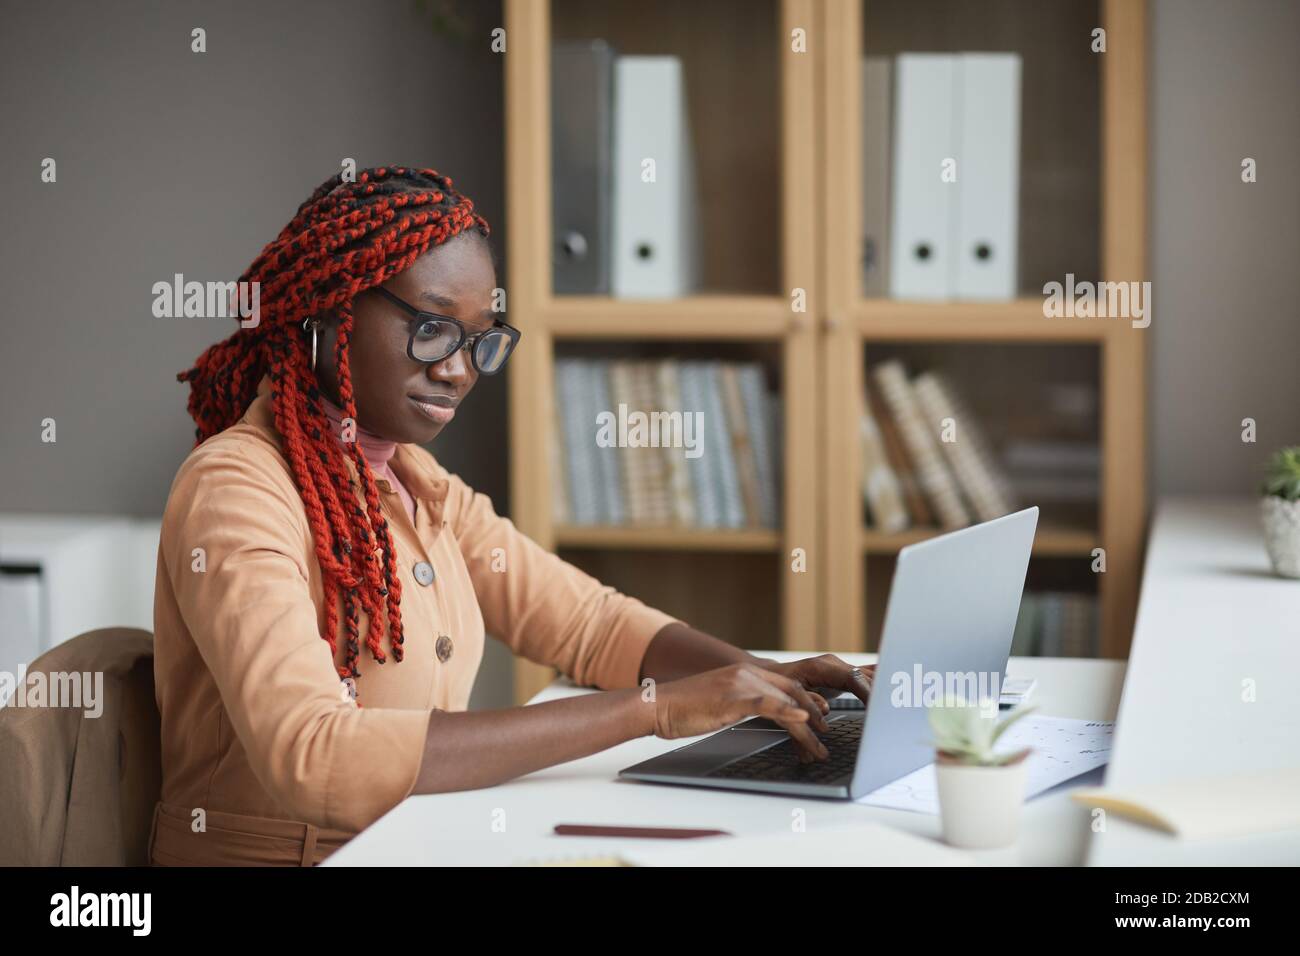 Side view portrait of young African-American woman using laptop while studying or working from home at workplace, copy space Stock Photo